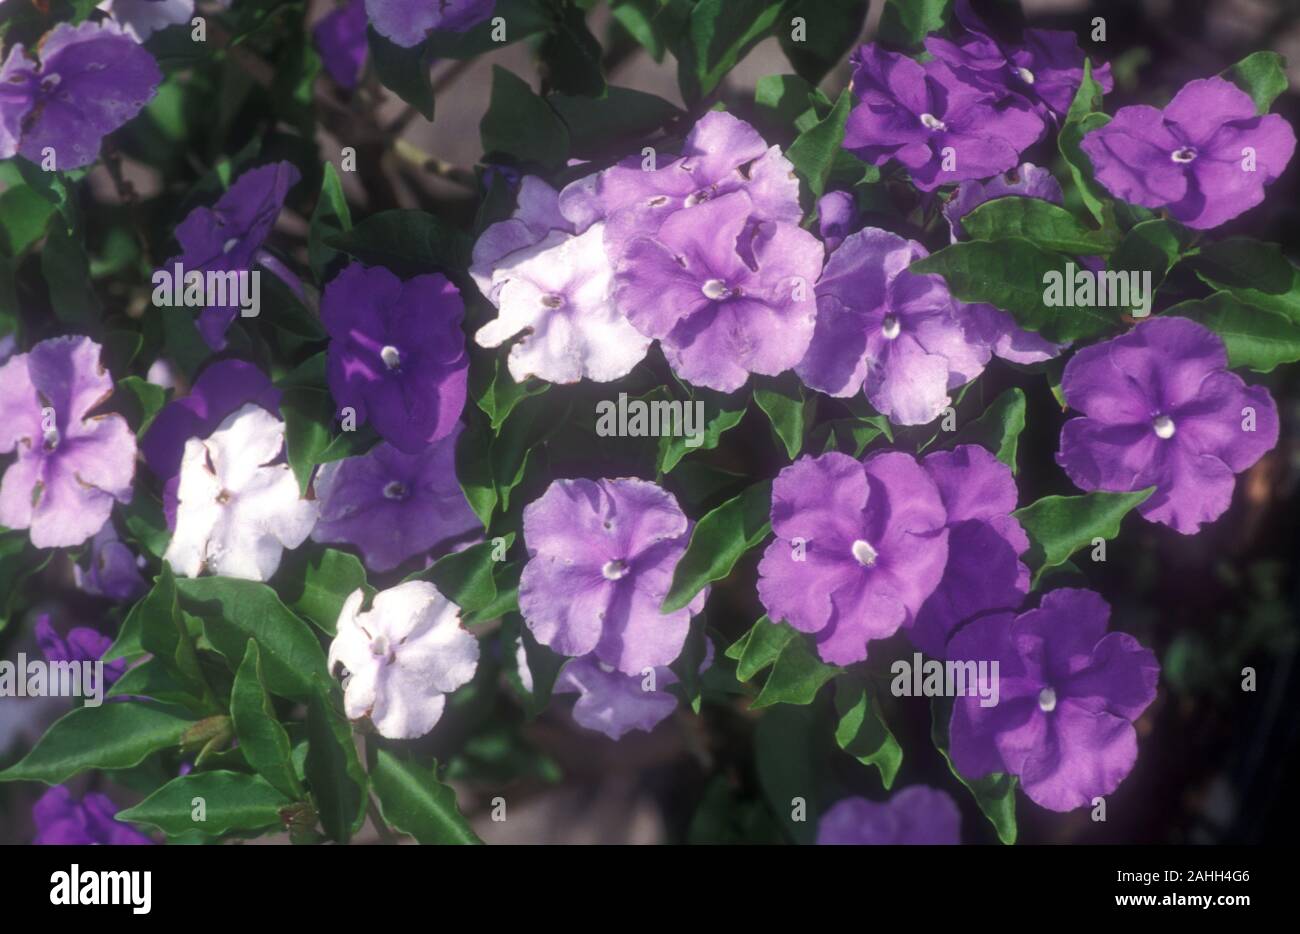 CLOSE-UP OF THE TRICOLOURED BLOOMS OF BRUNFELSIA AUSTRALIS, A DROUGHT RESISTANT PLANT. Stock Photo